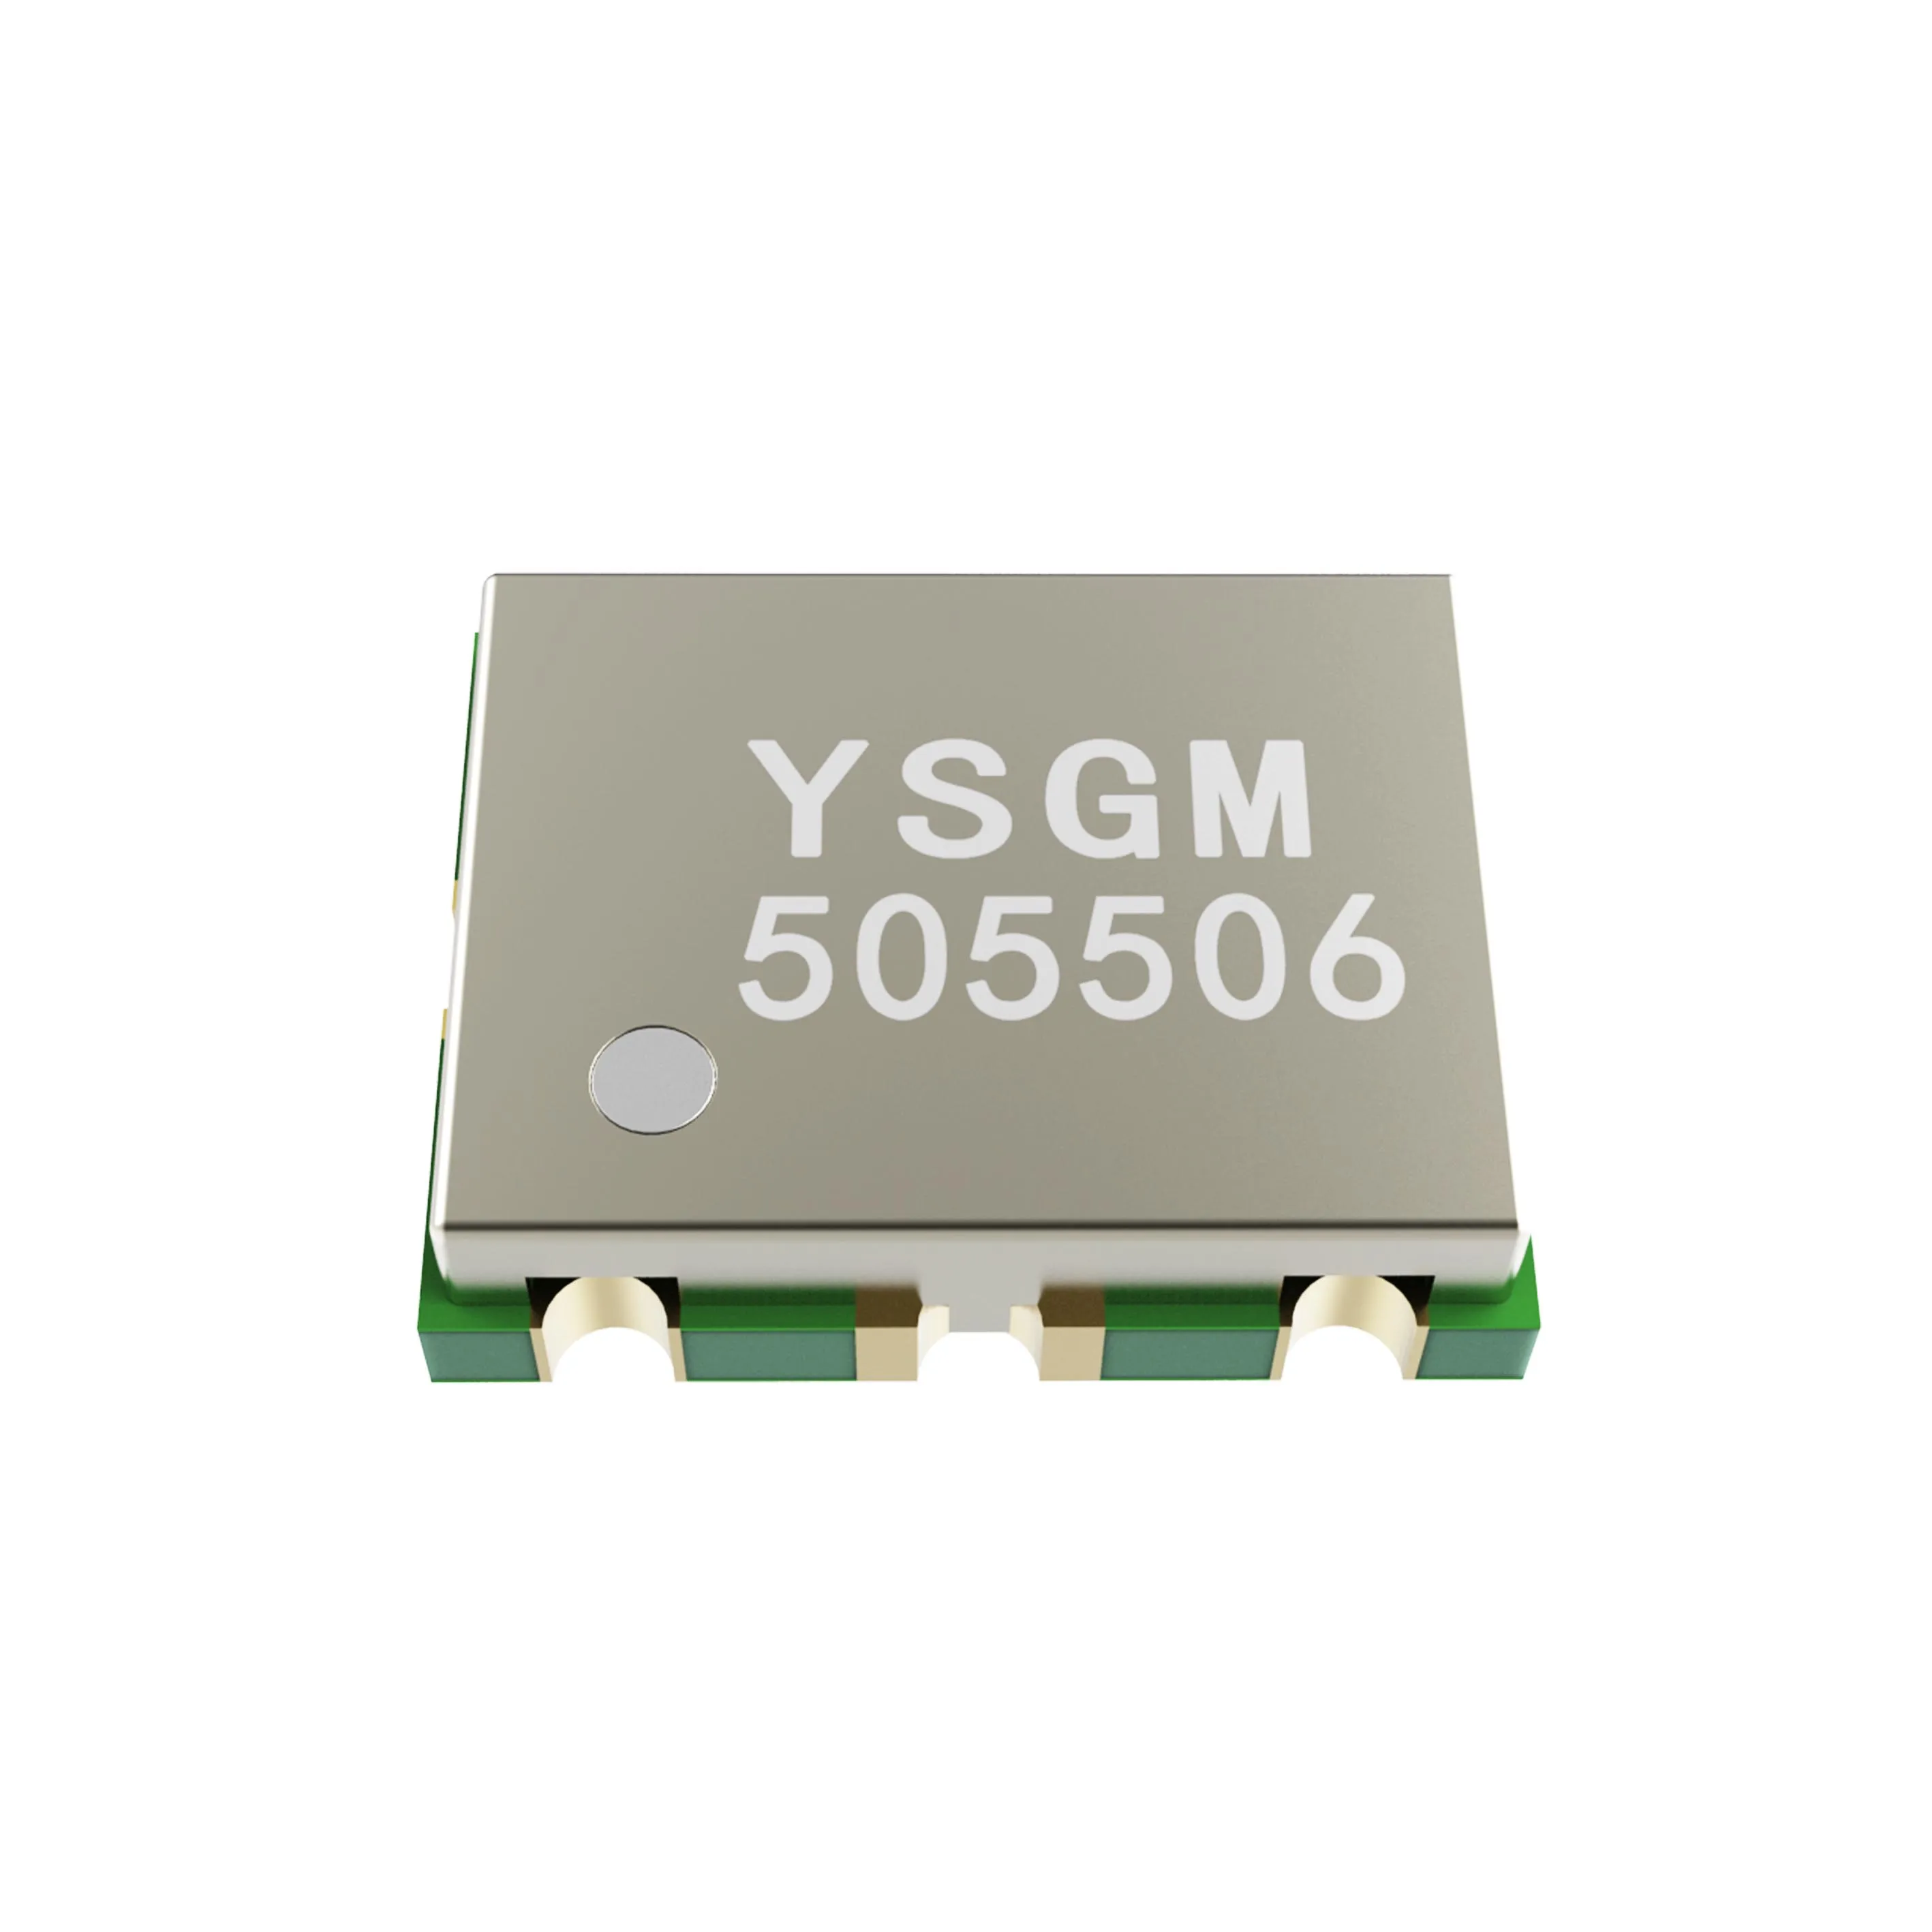 VCO Voltage Controlled Oscillator with Buffer Amplifier for IEEE 802.11a/n/ac 5150MHz-5350MHz 5pcs lot new icl8038ccpd icl8038 precision waveform generator voltage controlled oscillator ic dip 14 in stock